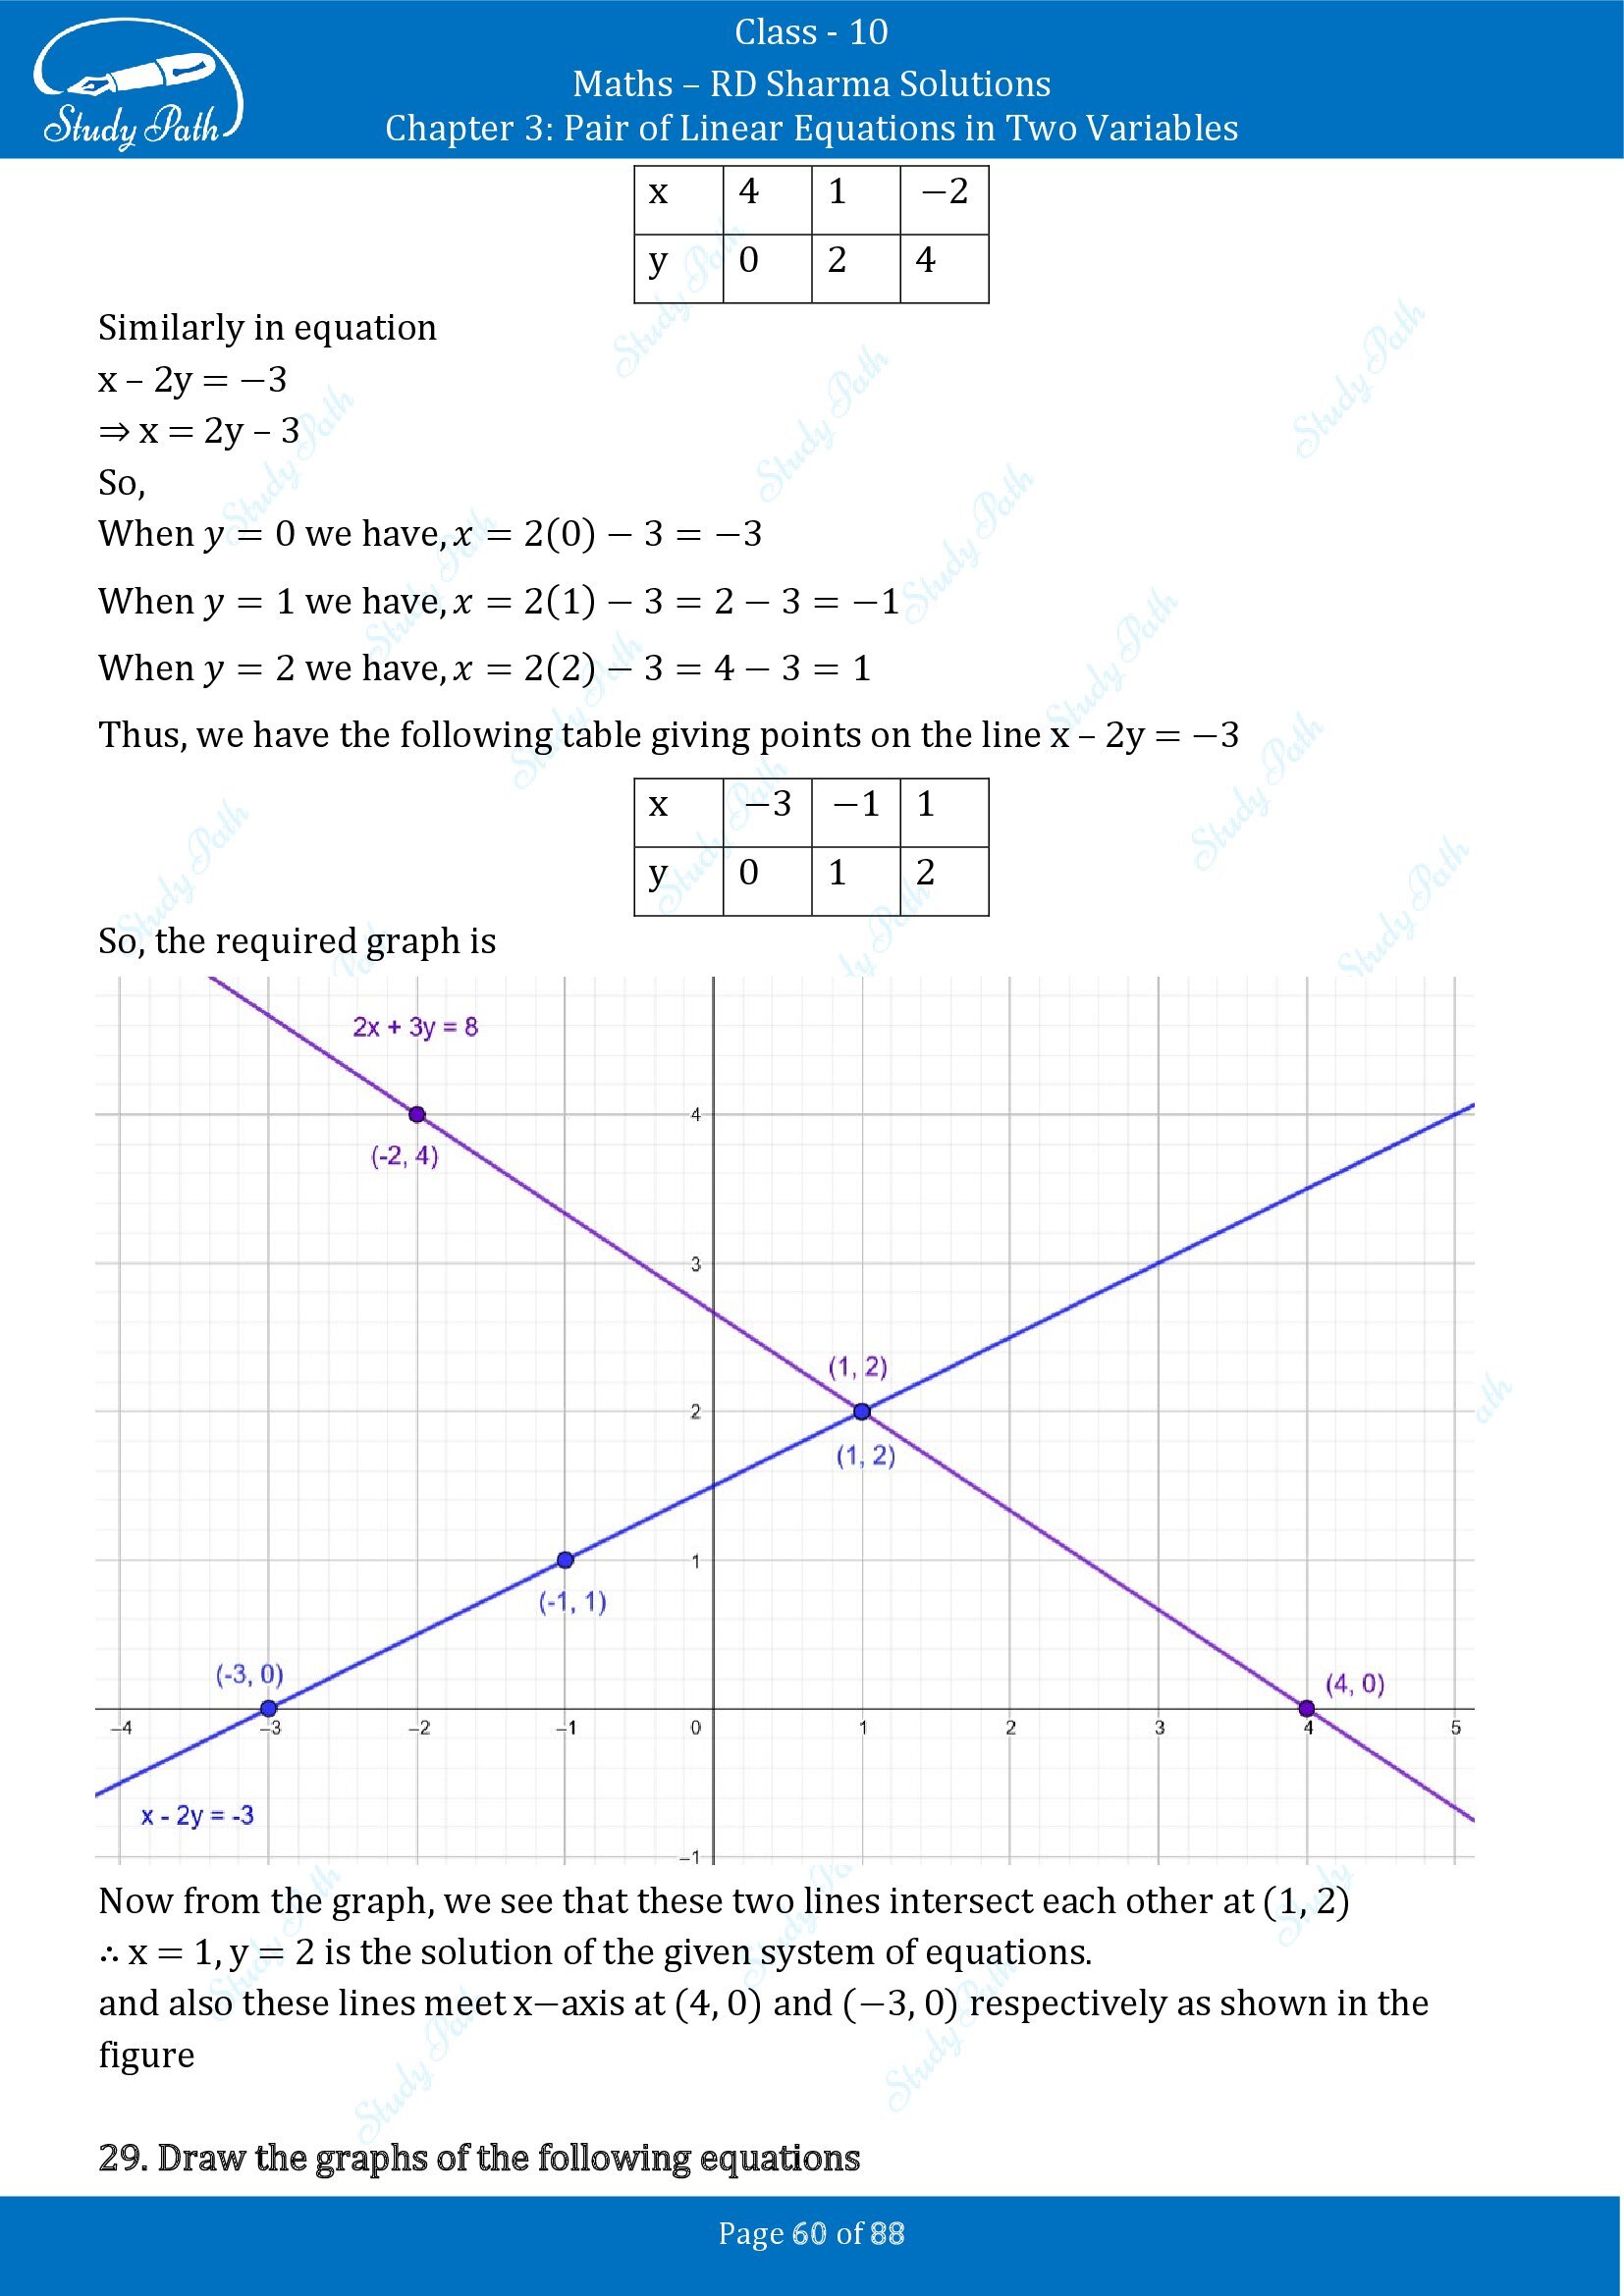 RD Sharma Solutions Class 10 Chapter 3 Pair of Linear Equations in Two Variables Exercise 3.2 00060